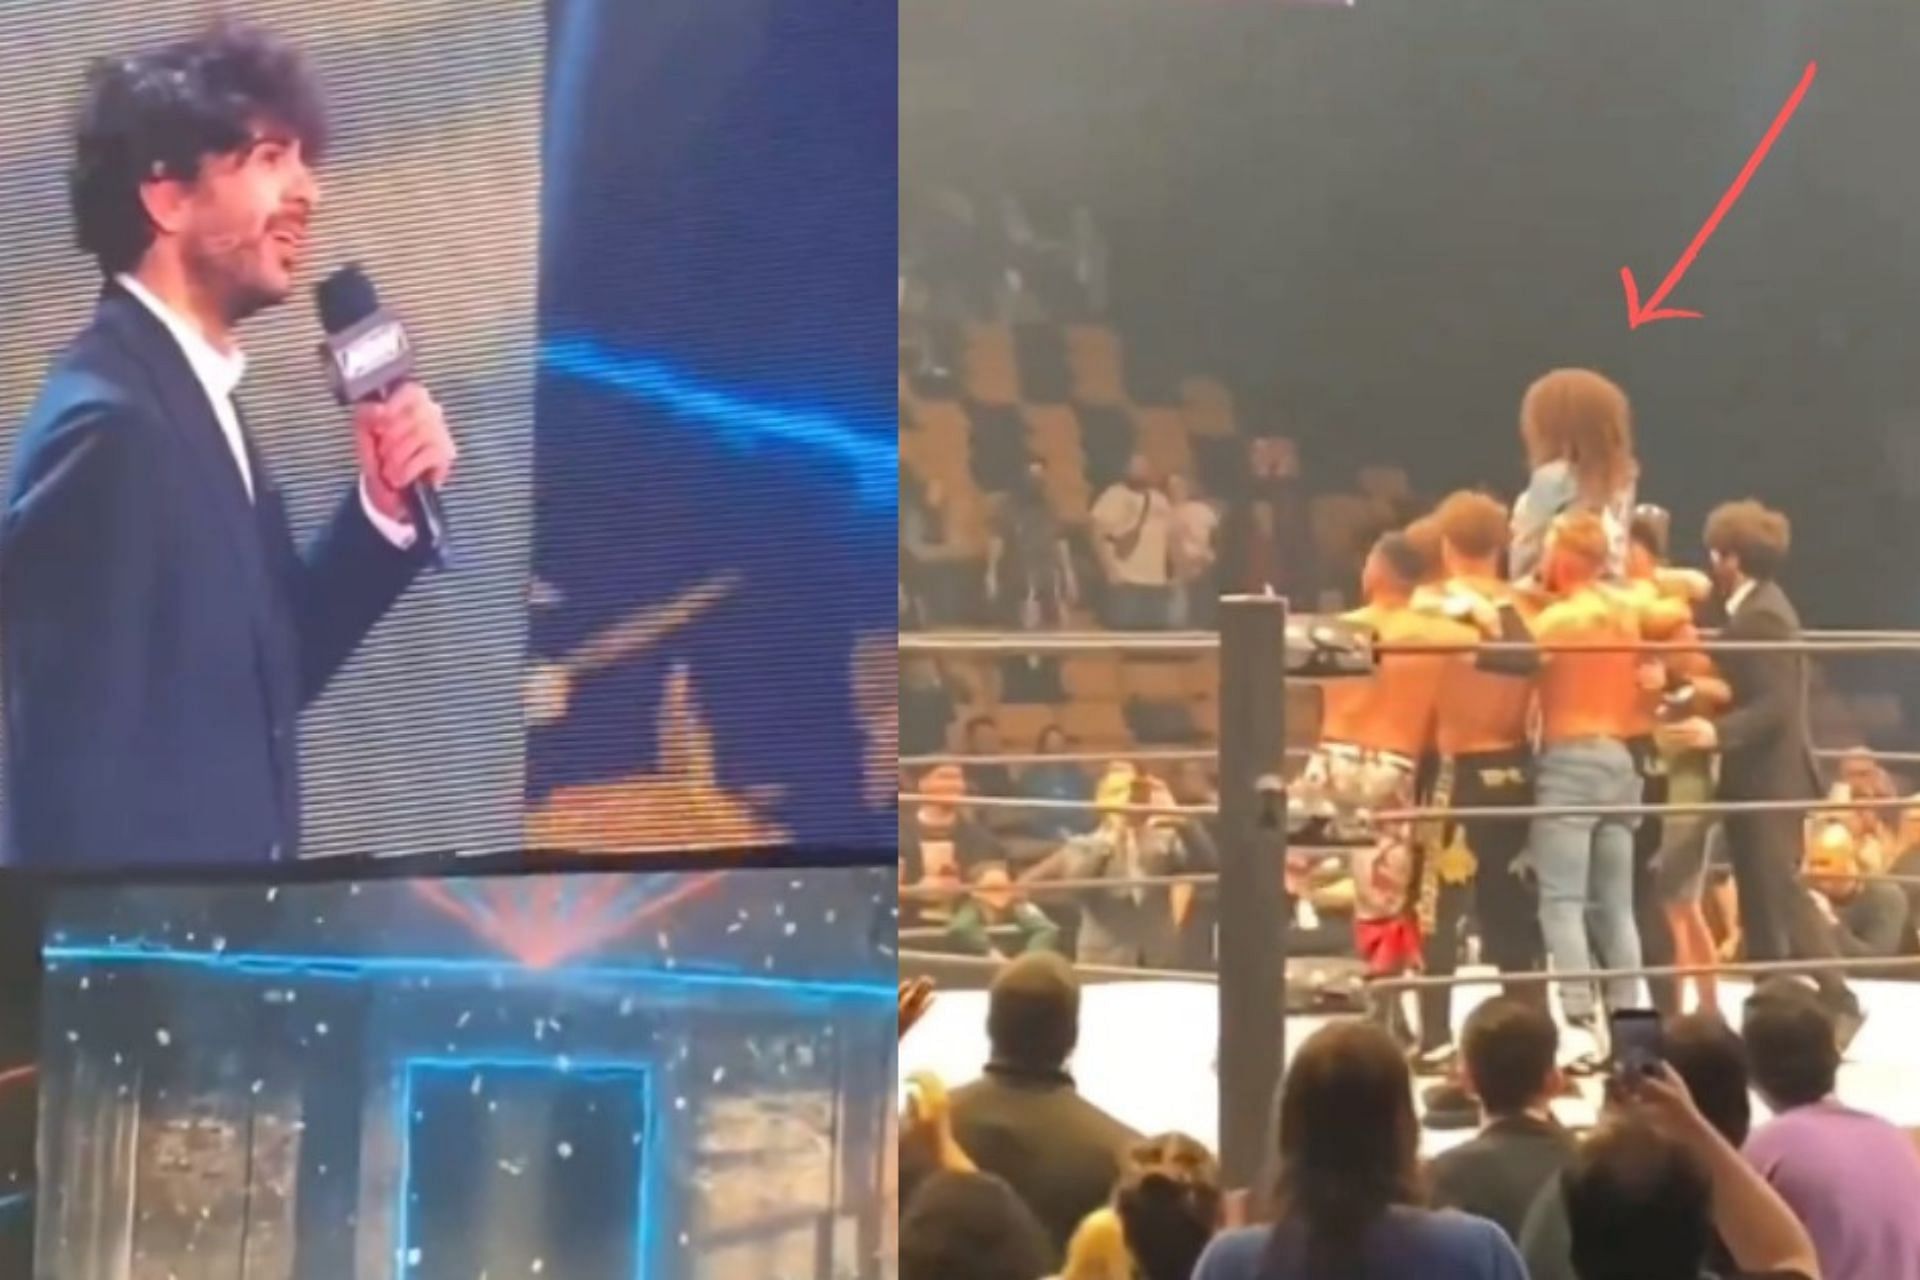 The surprise involved a rarely-seen AEW star